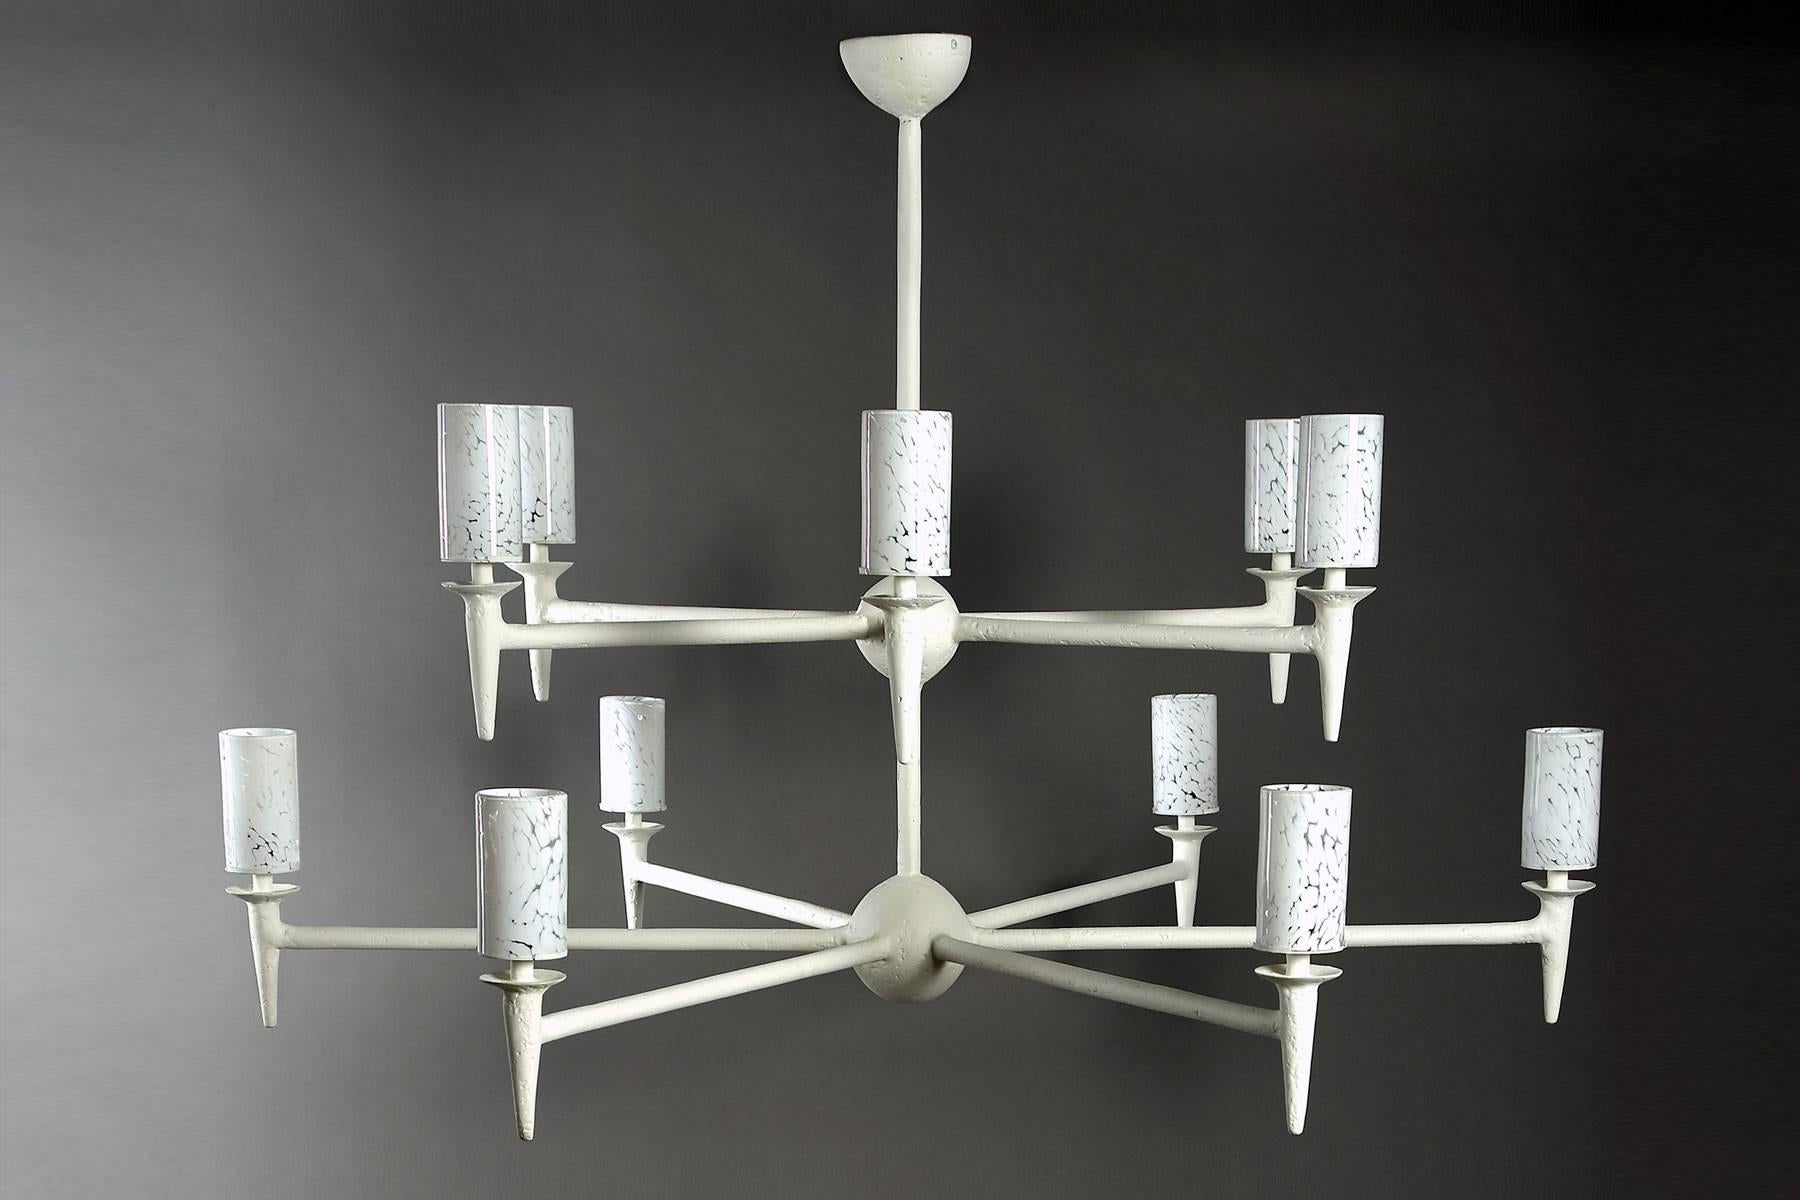 This large chandelier which is part of our plaster of Paris lighting collection, can be made custom. This model features 12 arms on two tiers. The light is diffused through the hand blown glass cylinders which provide a beautiful glow. Two options